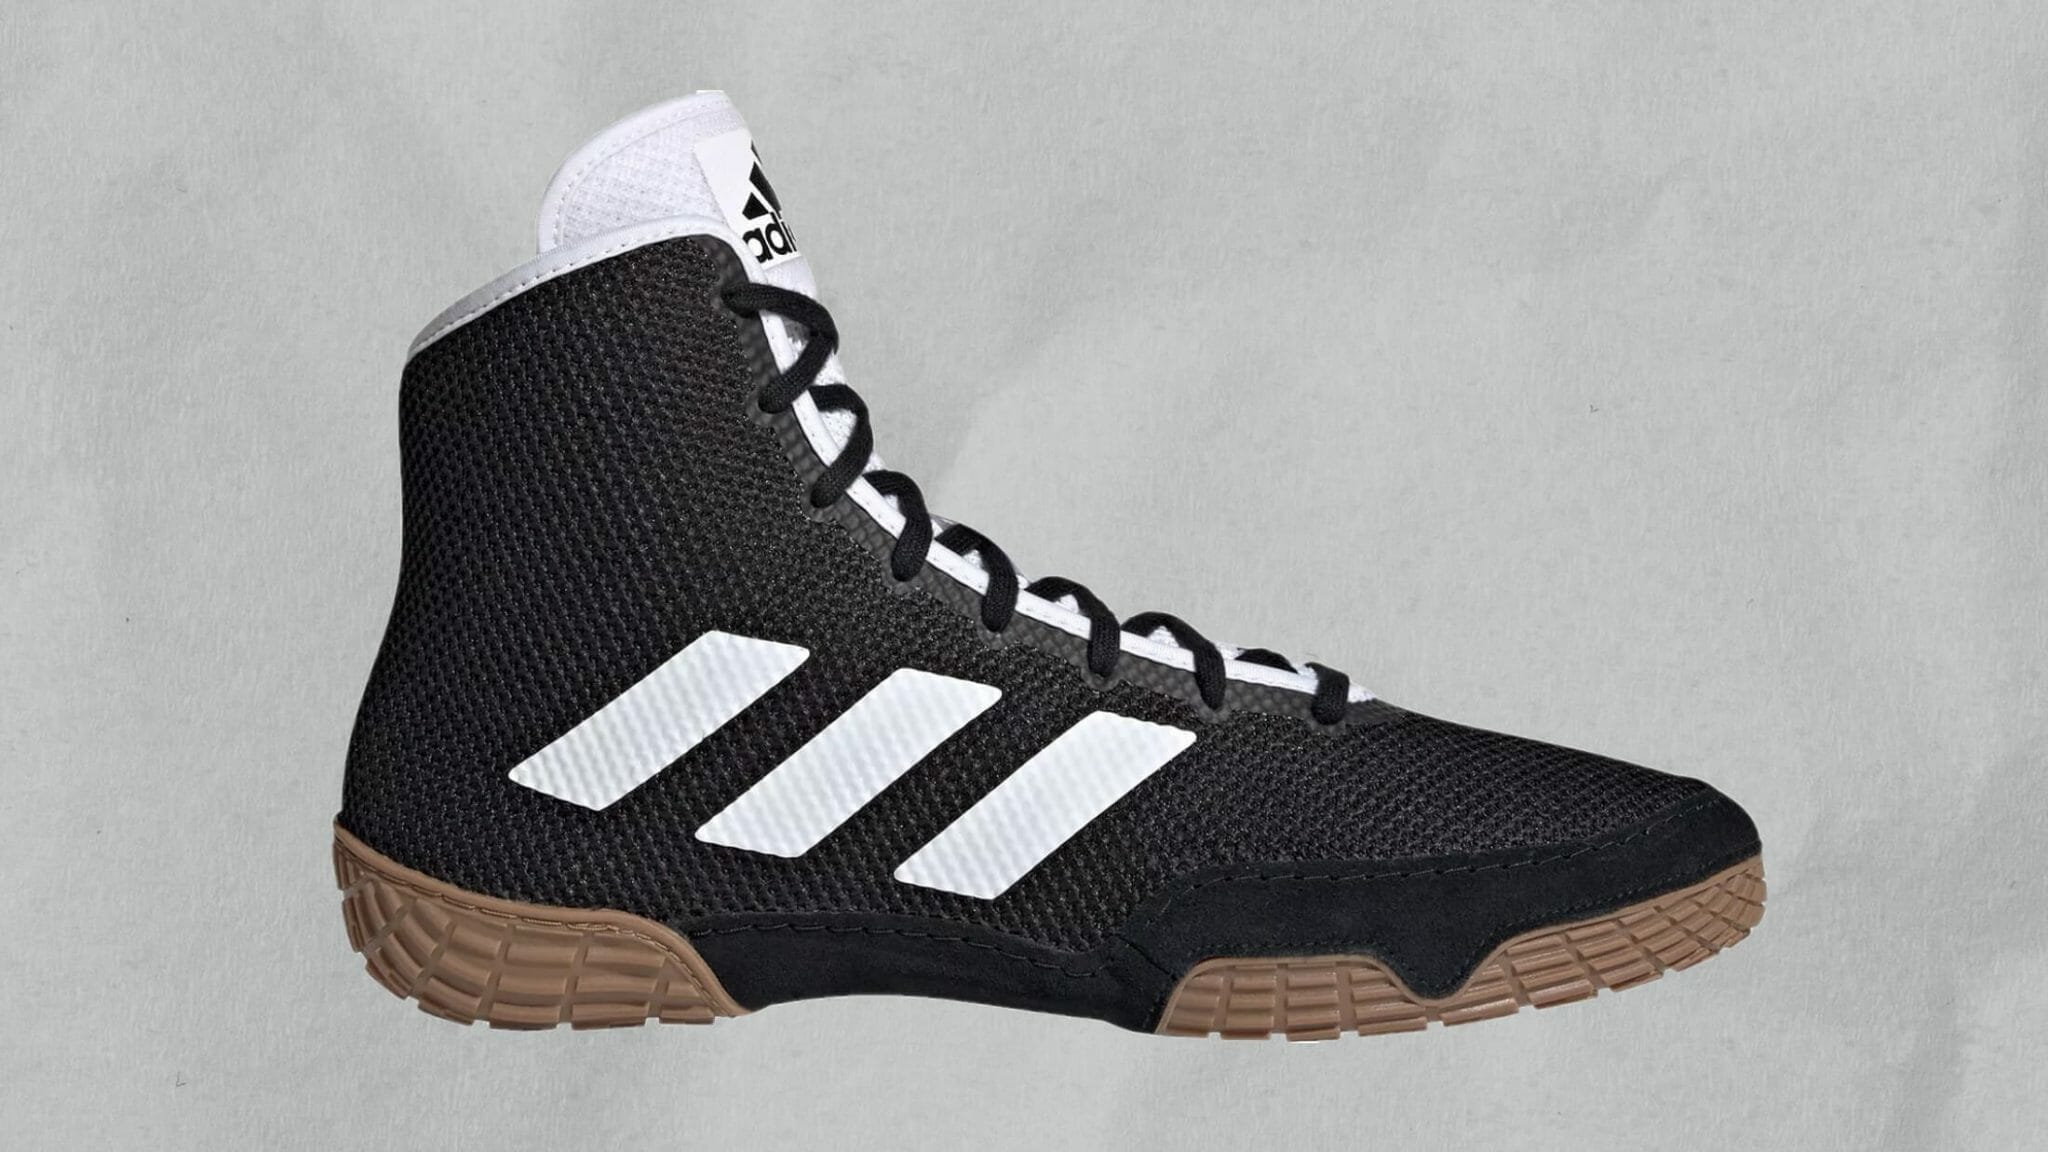 adidas Tech Fall 2.0 - ShoeGuide's pick for best wrestling shoe.